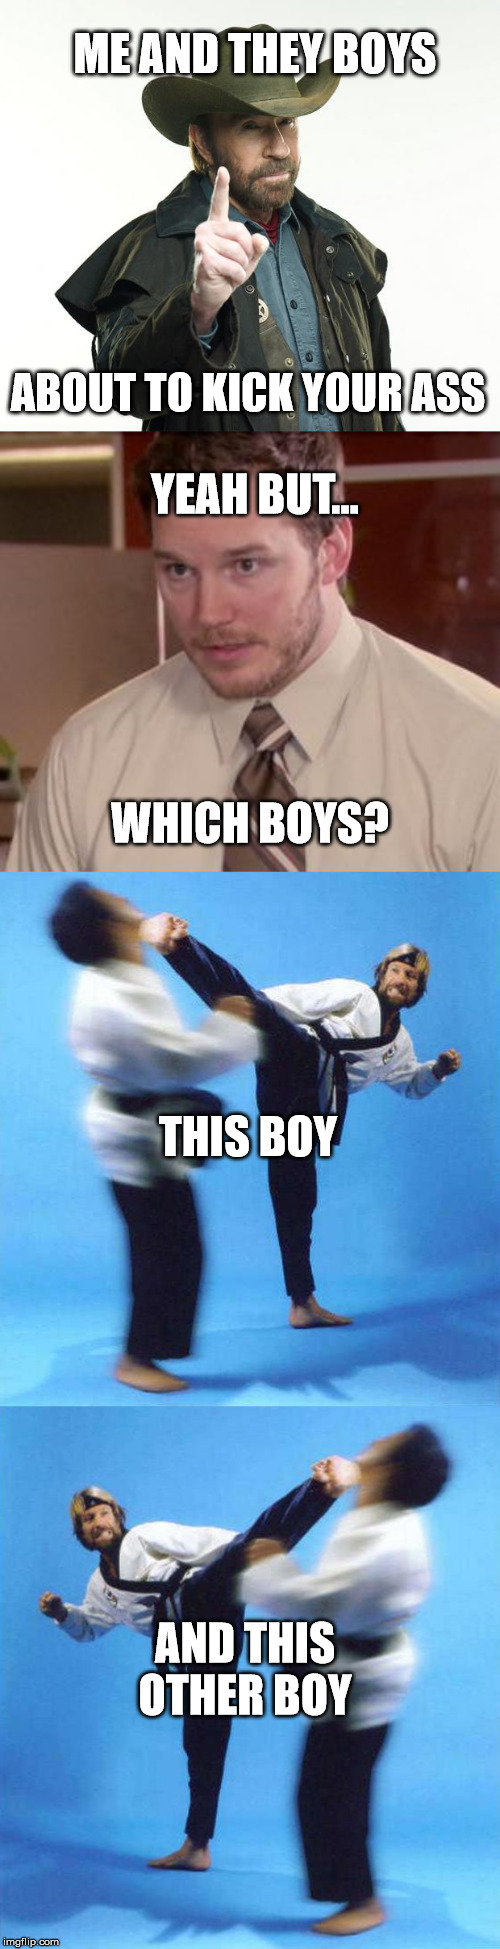 ME AND THEY BOYS; ABOUT TO KICK YOUR ASS; YEAH BUT... WHICH BOYS? THIS BOY; AND THIS OTHER BOY | image tagged in roundhouse kick chuck norris,memes,chuck norris finger,andy dwyer | made w/ Imgflip meme maker